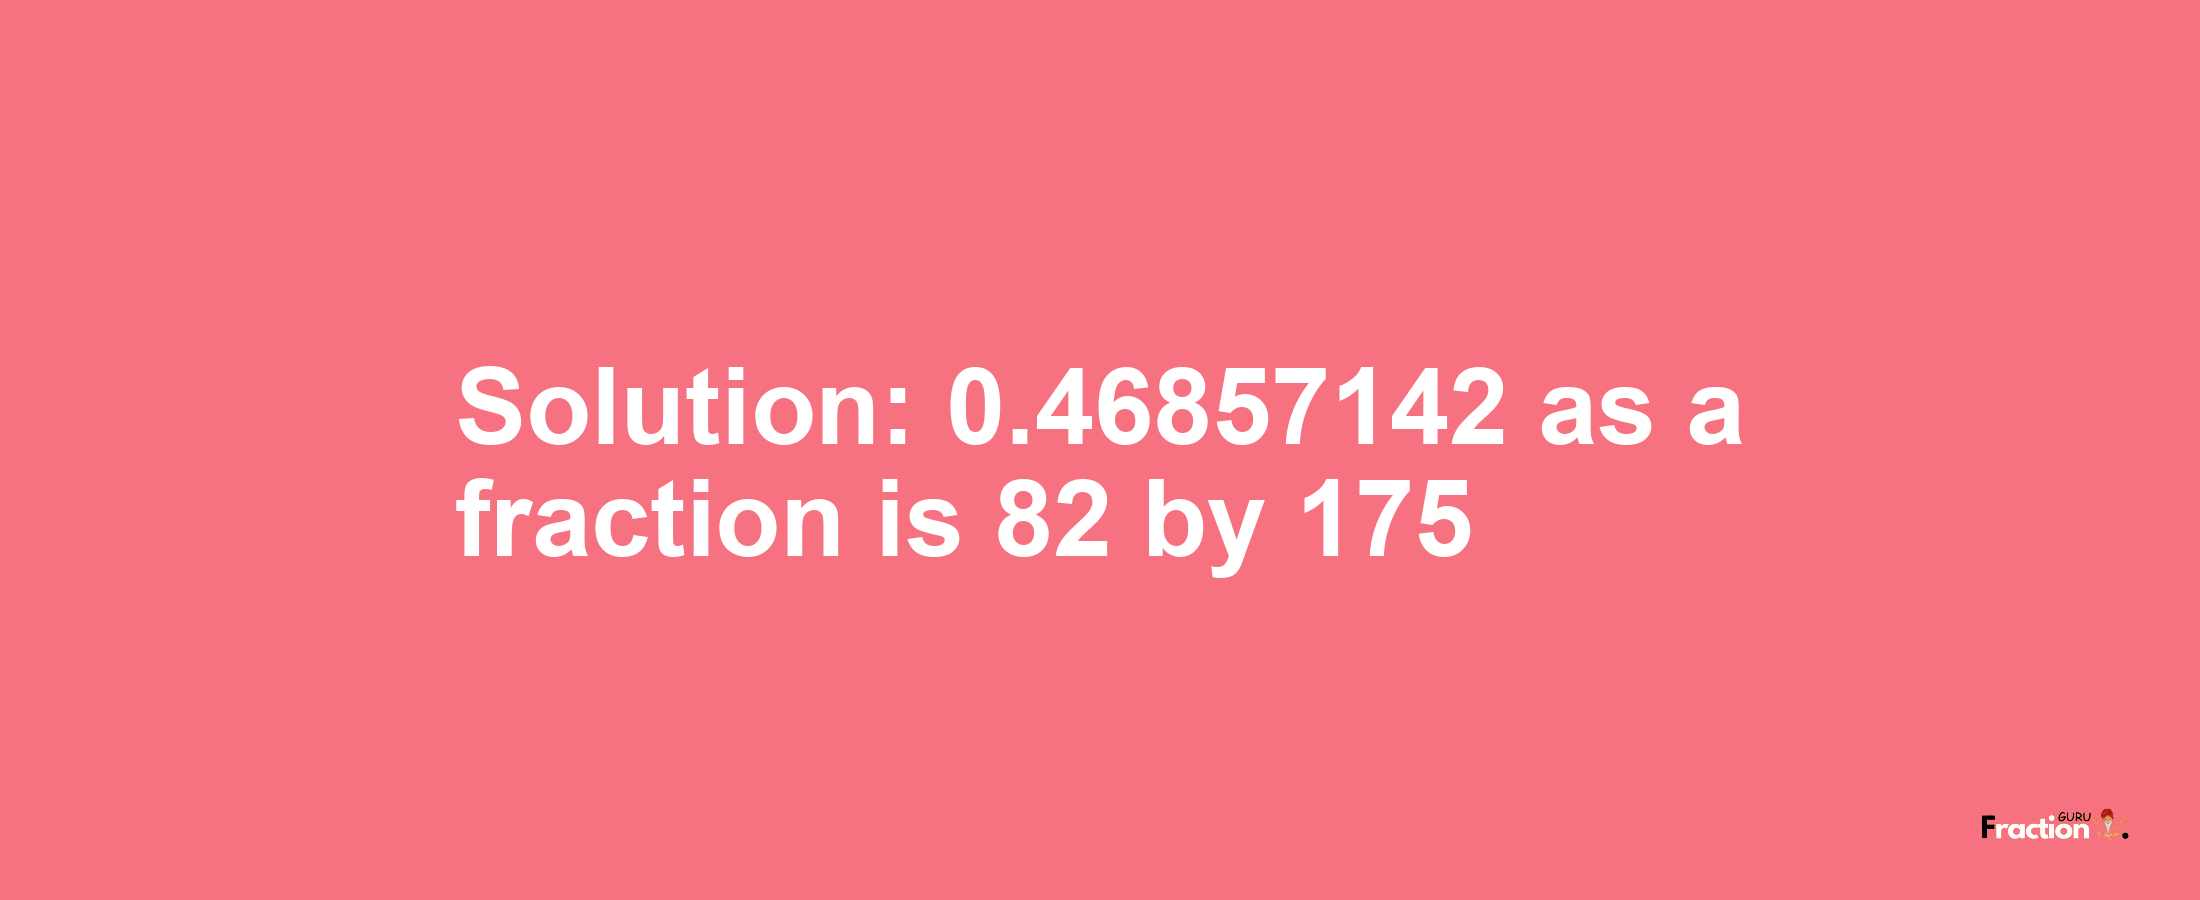 Solution:0.46857142 as a fraction is 82/175